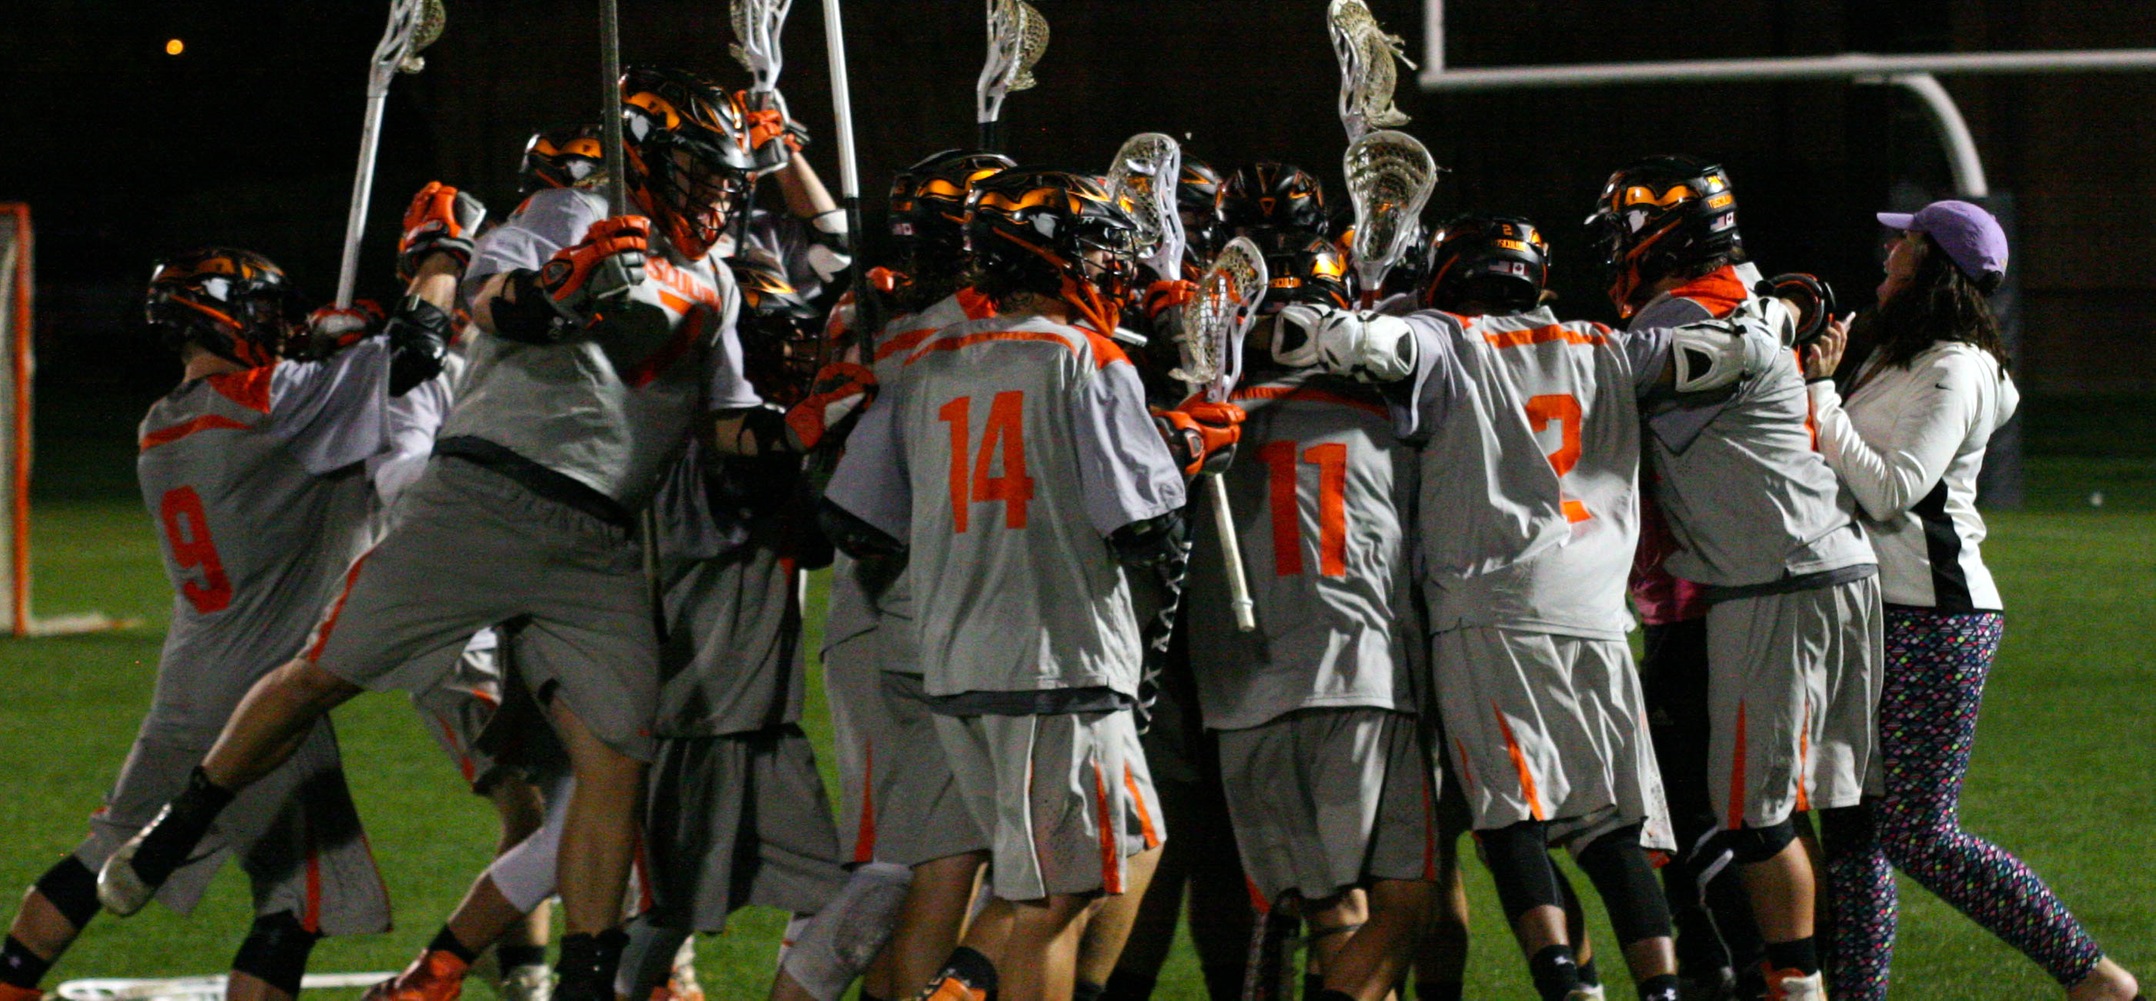 Tusculum beats Lincoln Memorial 11-4 to advance to SAC semifinals